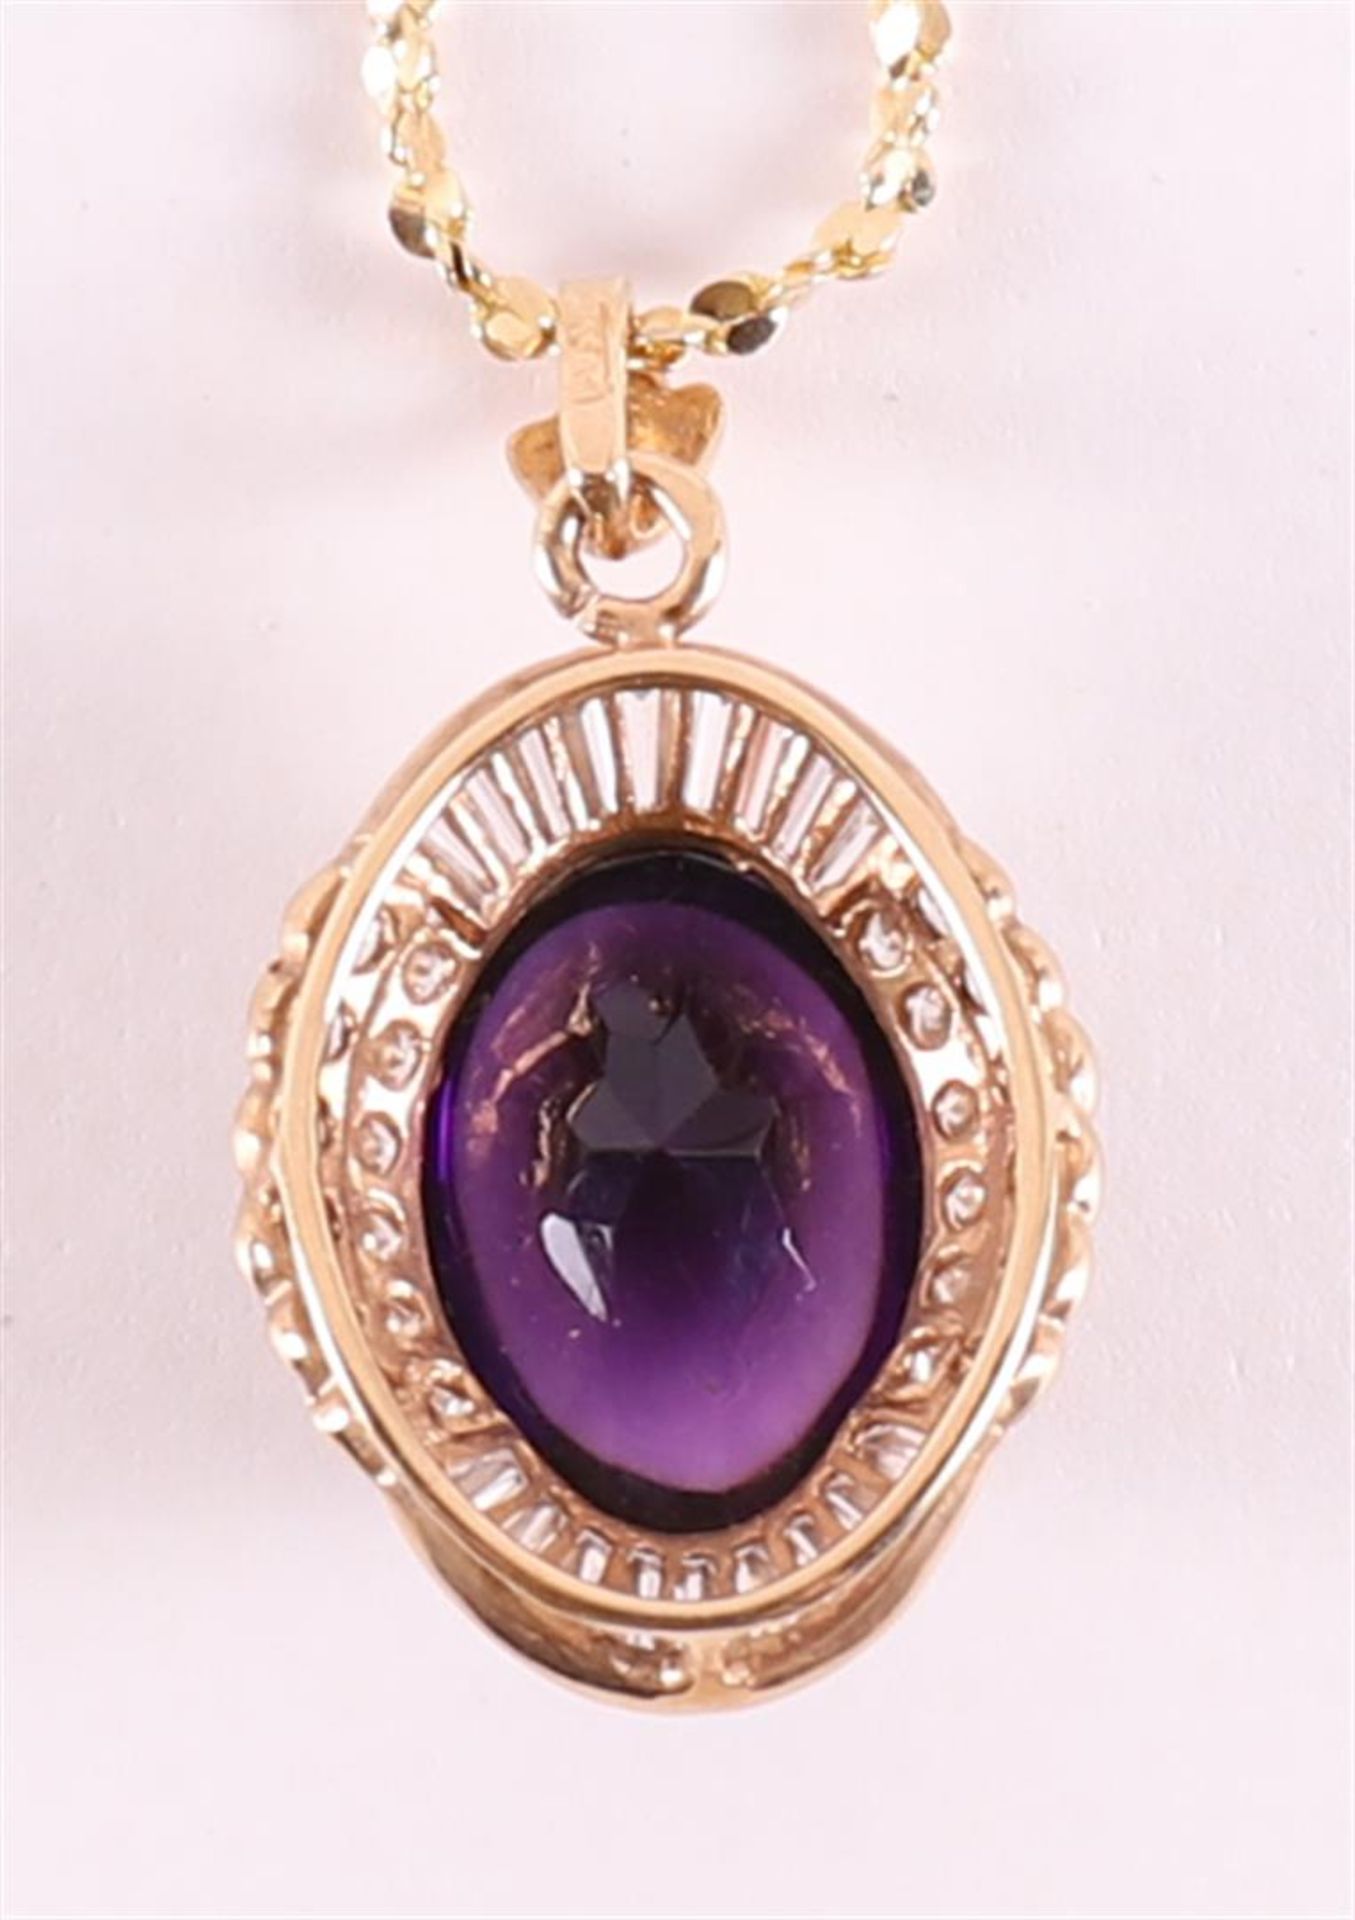 A 14 kt gold necklace and pendant with a cabochon cut amethyst. - Bild 3 aus 3